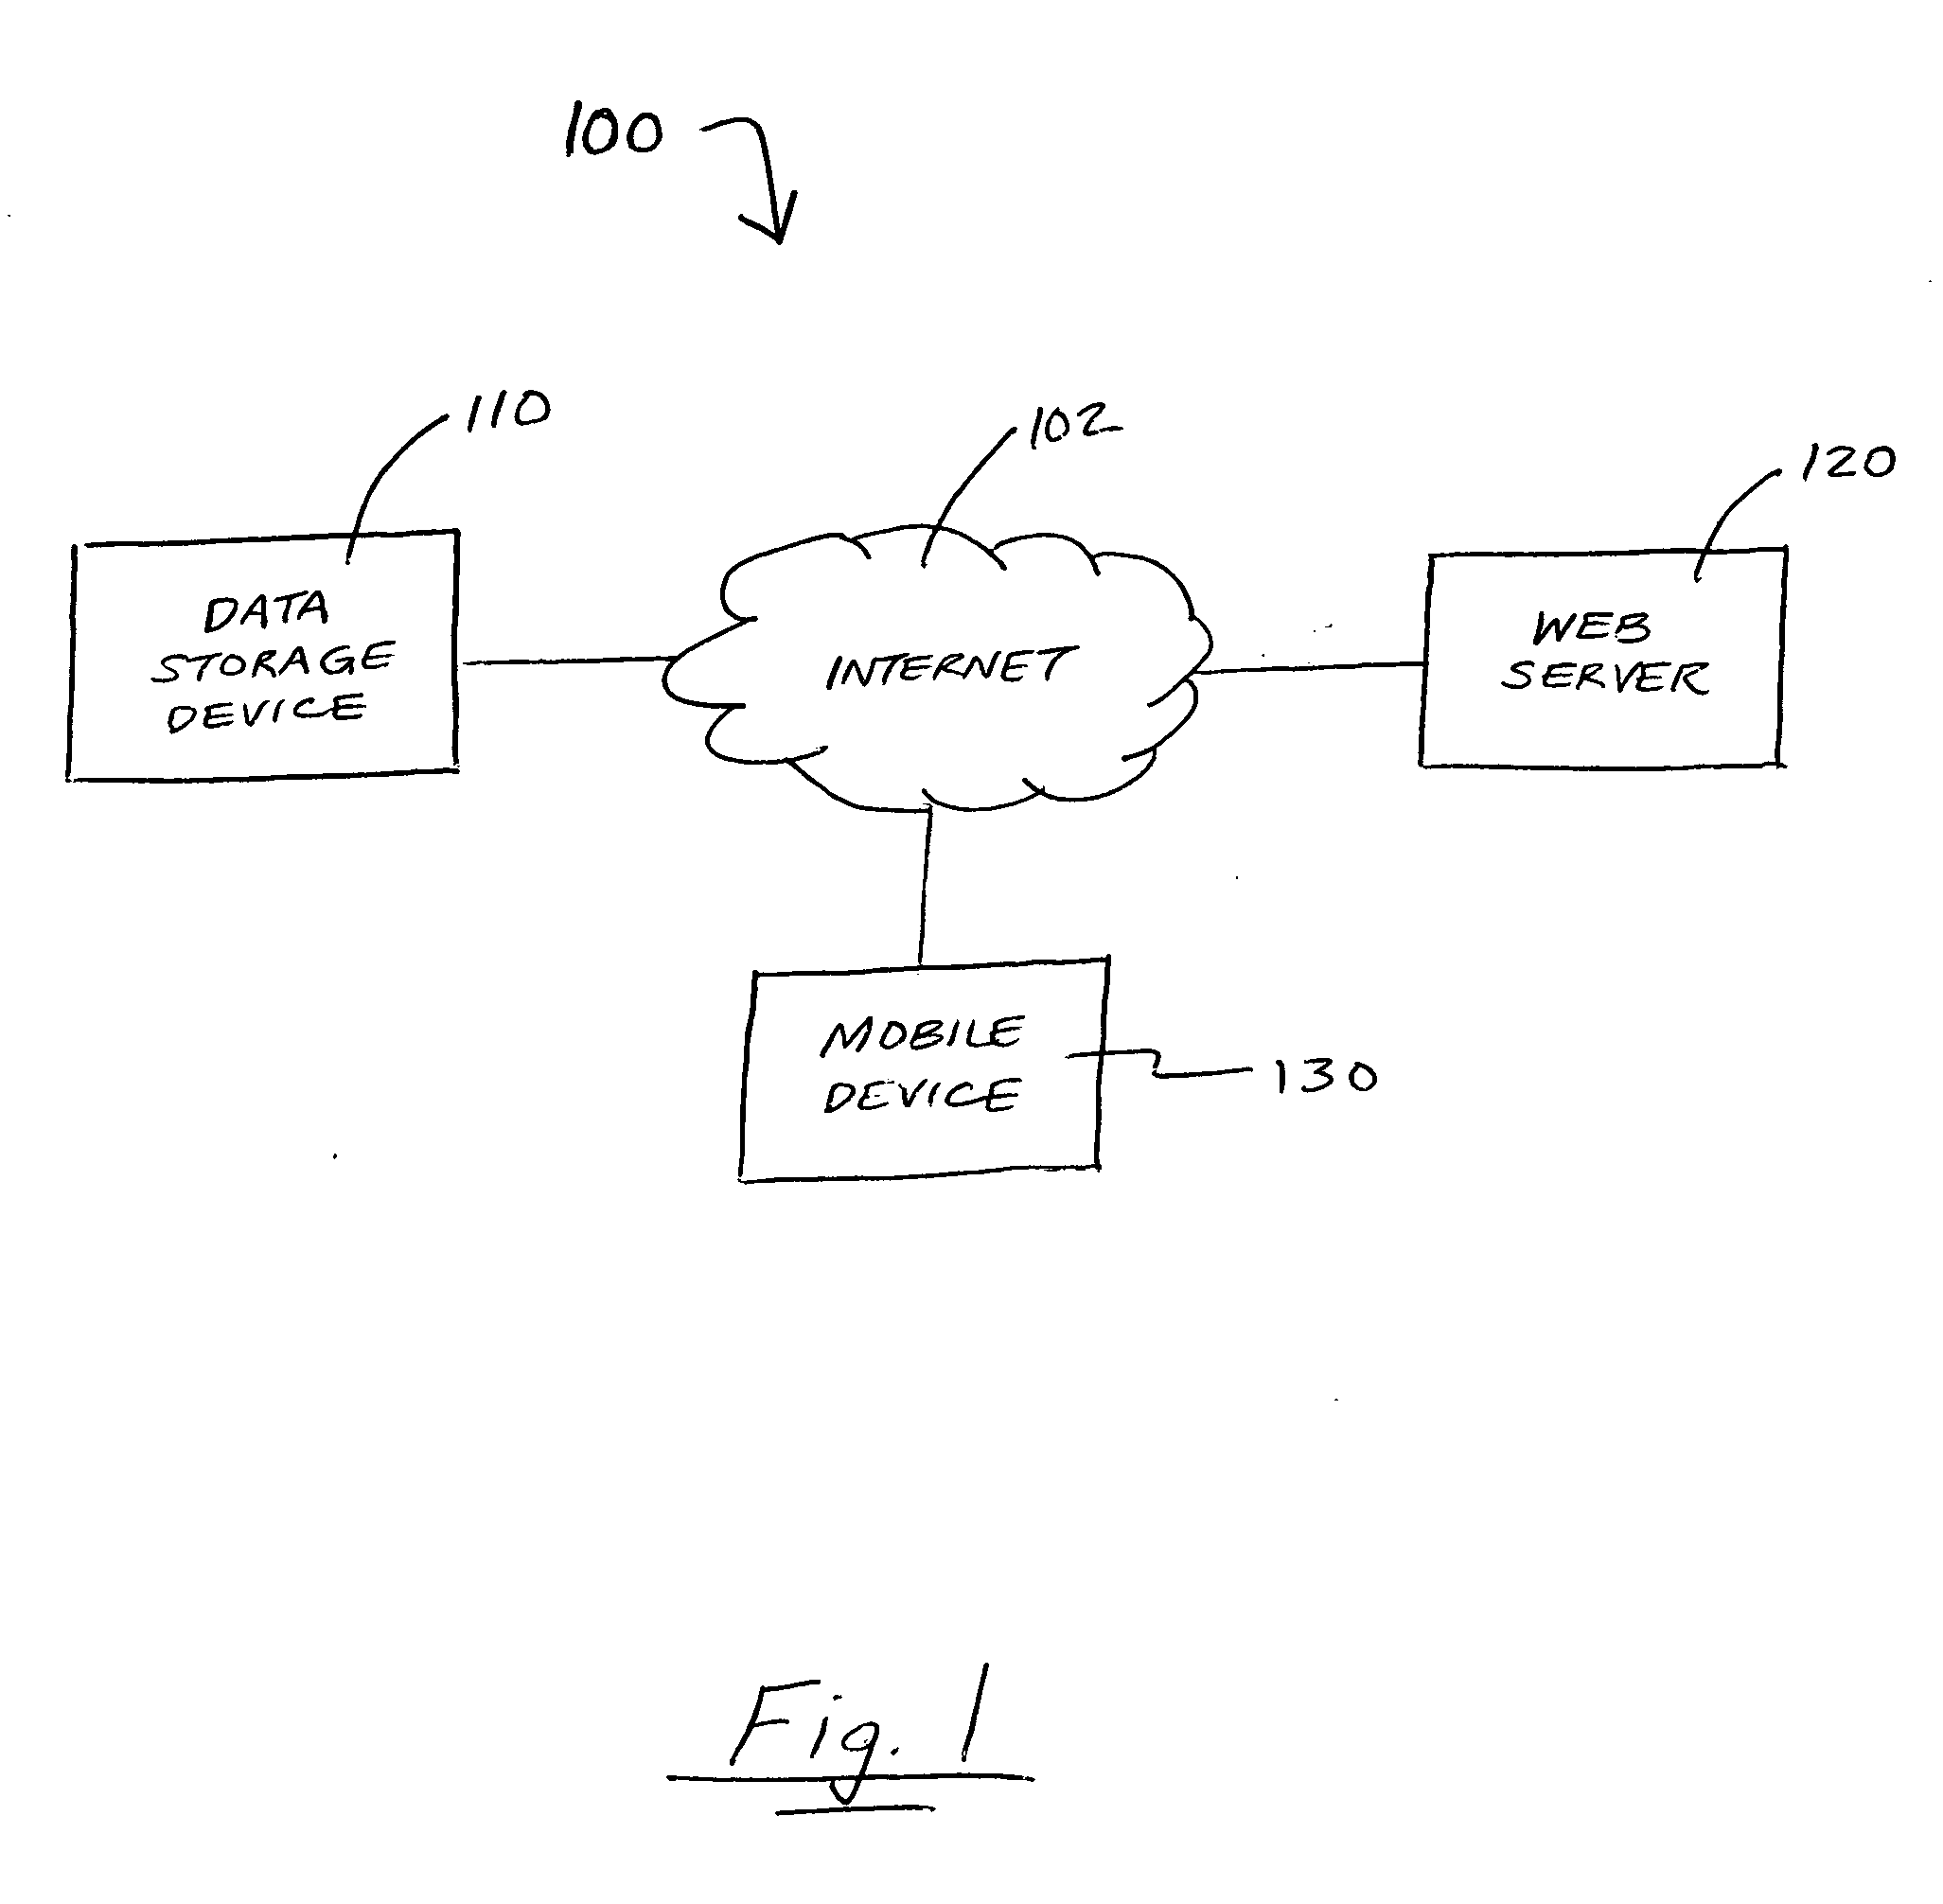 Method and system for accessing and viewing files on mobile devices